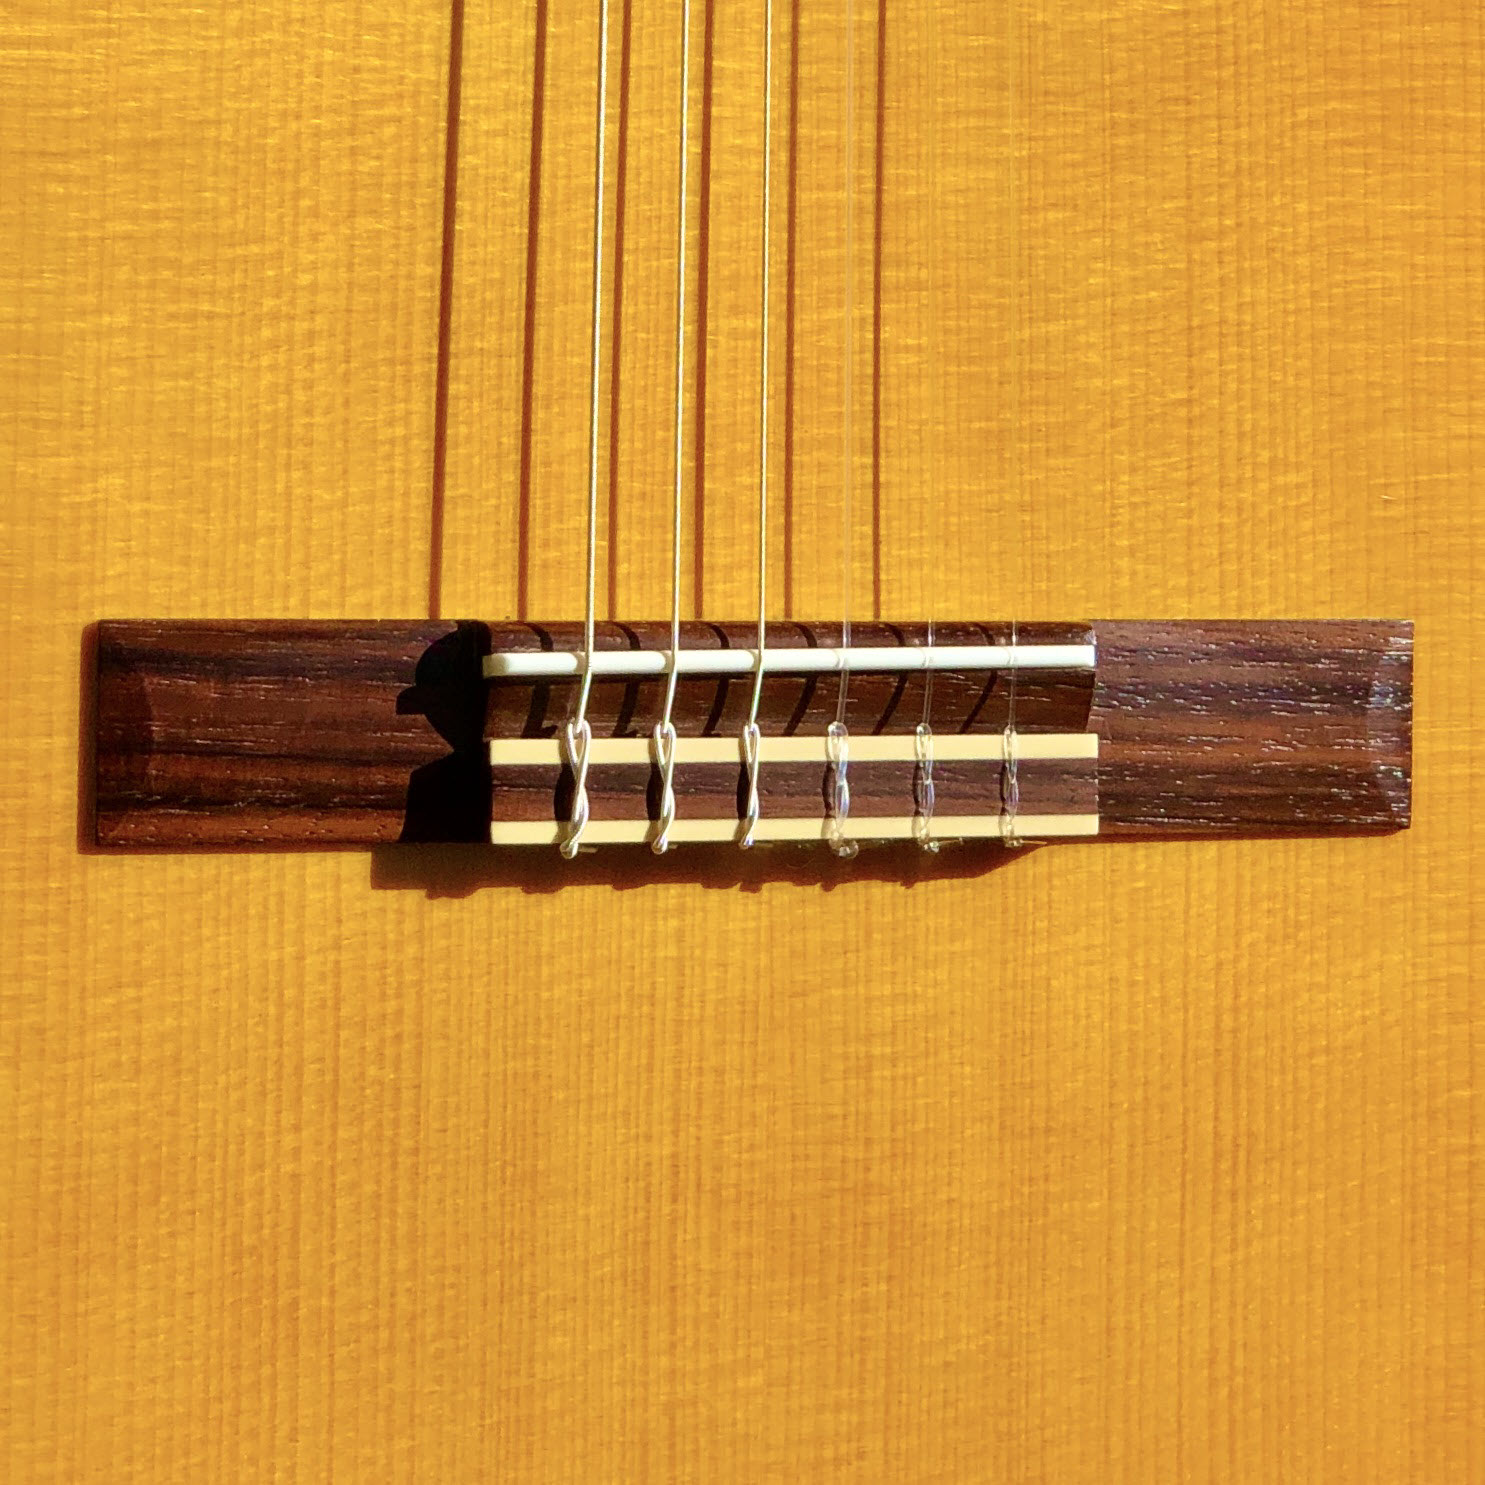 Tips for Playing Nylon-String Guitar